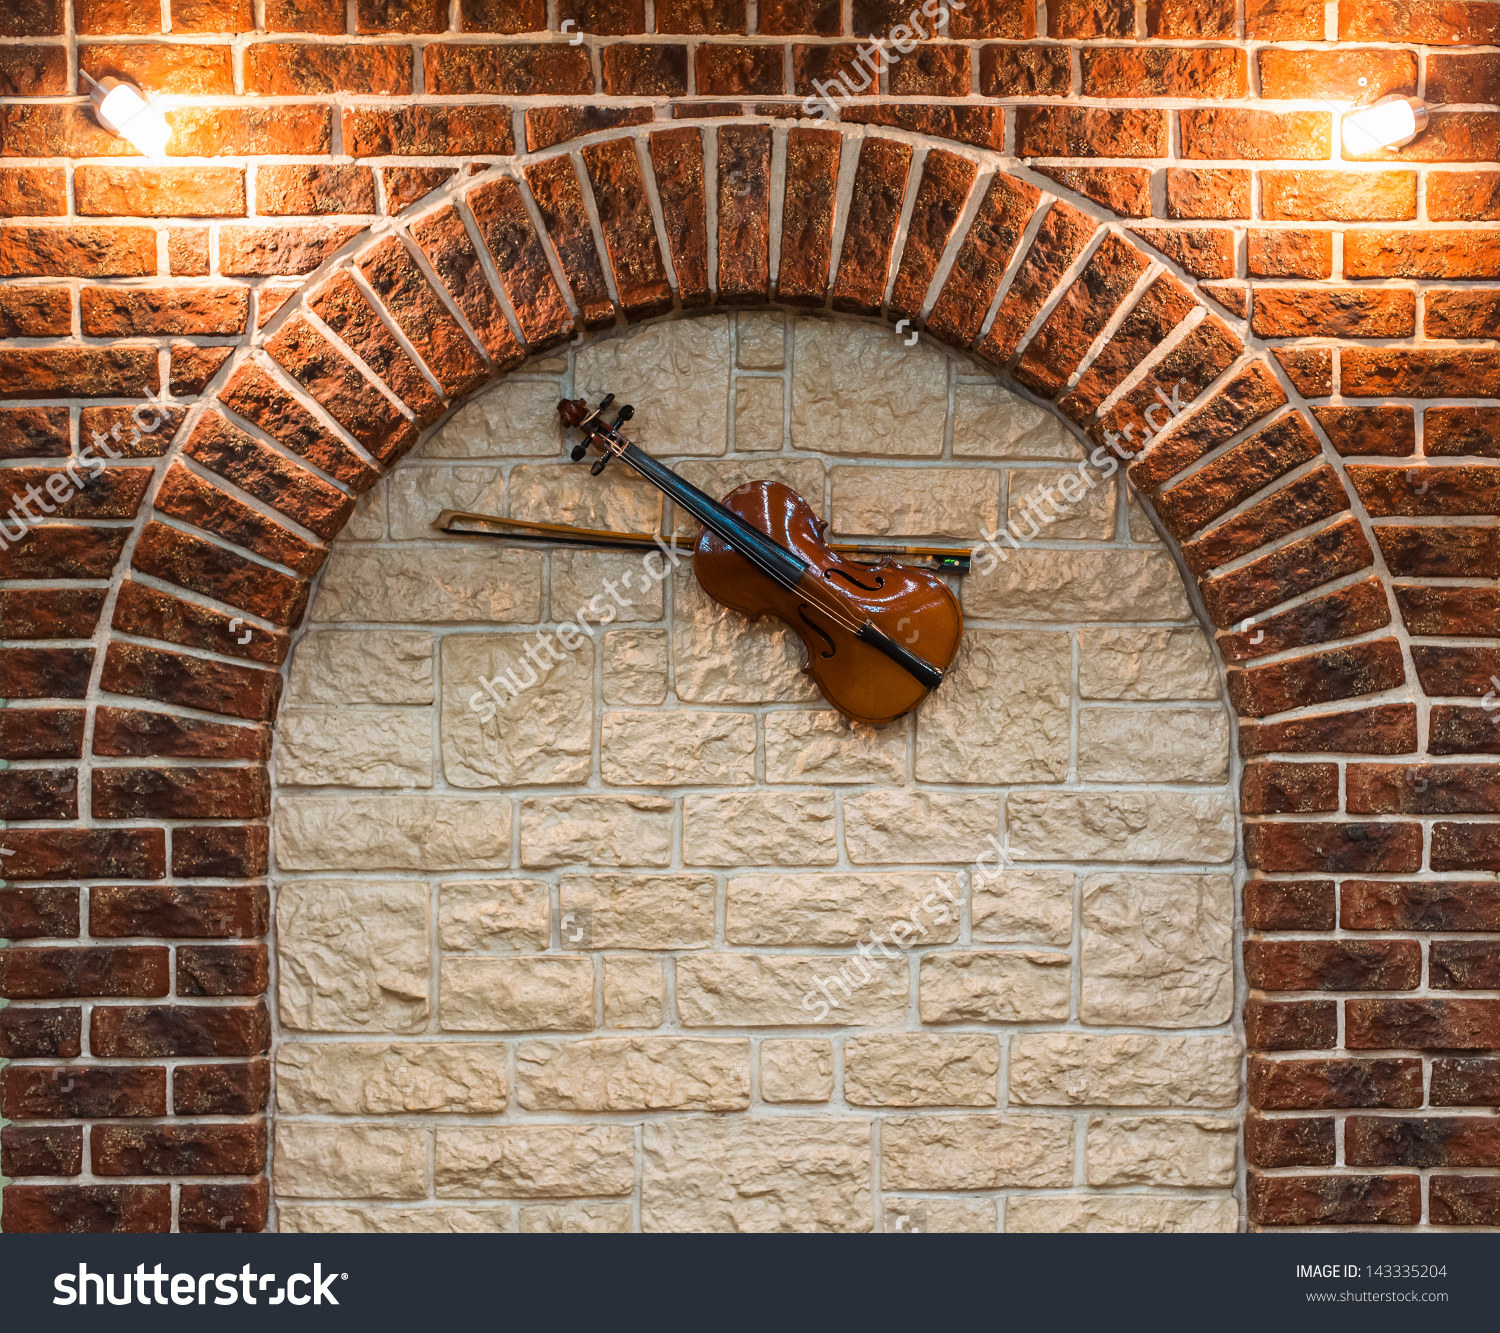 Element Of The Interior Stone Arch With A Violin On Wall Stock Save ...